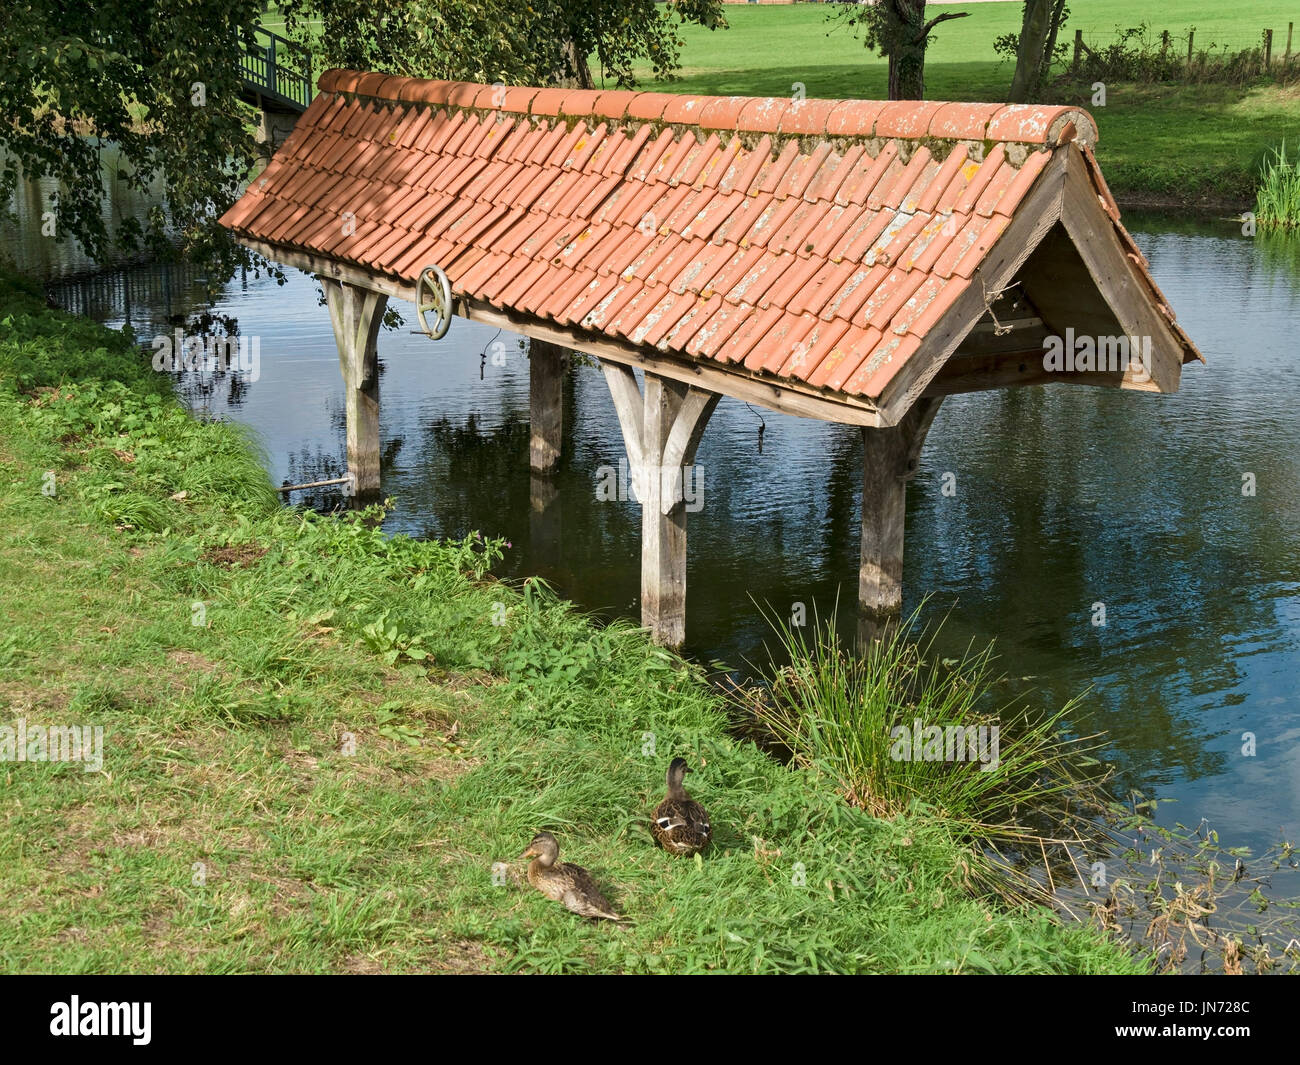 Old wooden boat house with clay tiled roof in fishpond in the grounds of Doddington Hall Estate, Lincolnshire, England, UK Stock Photo